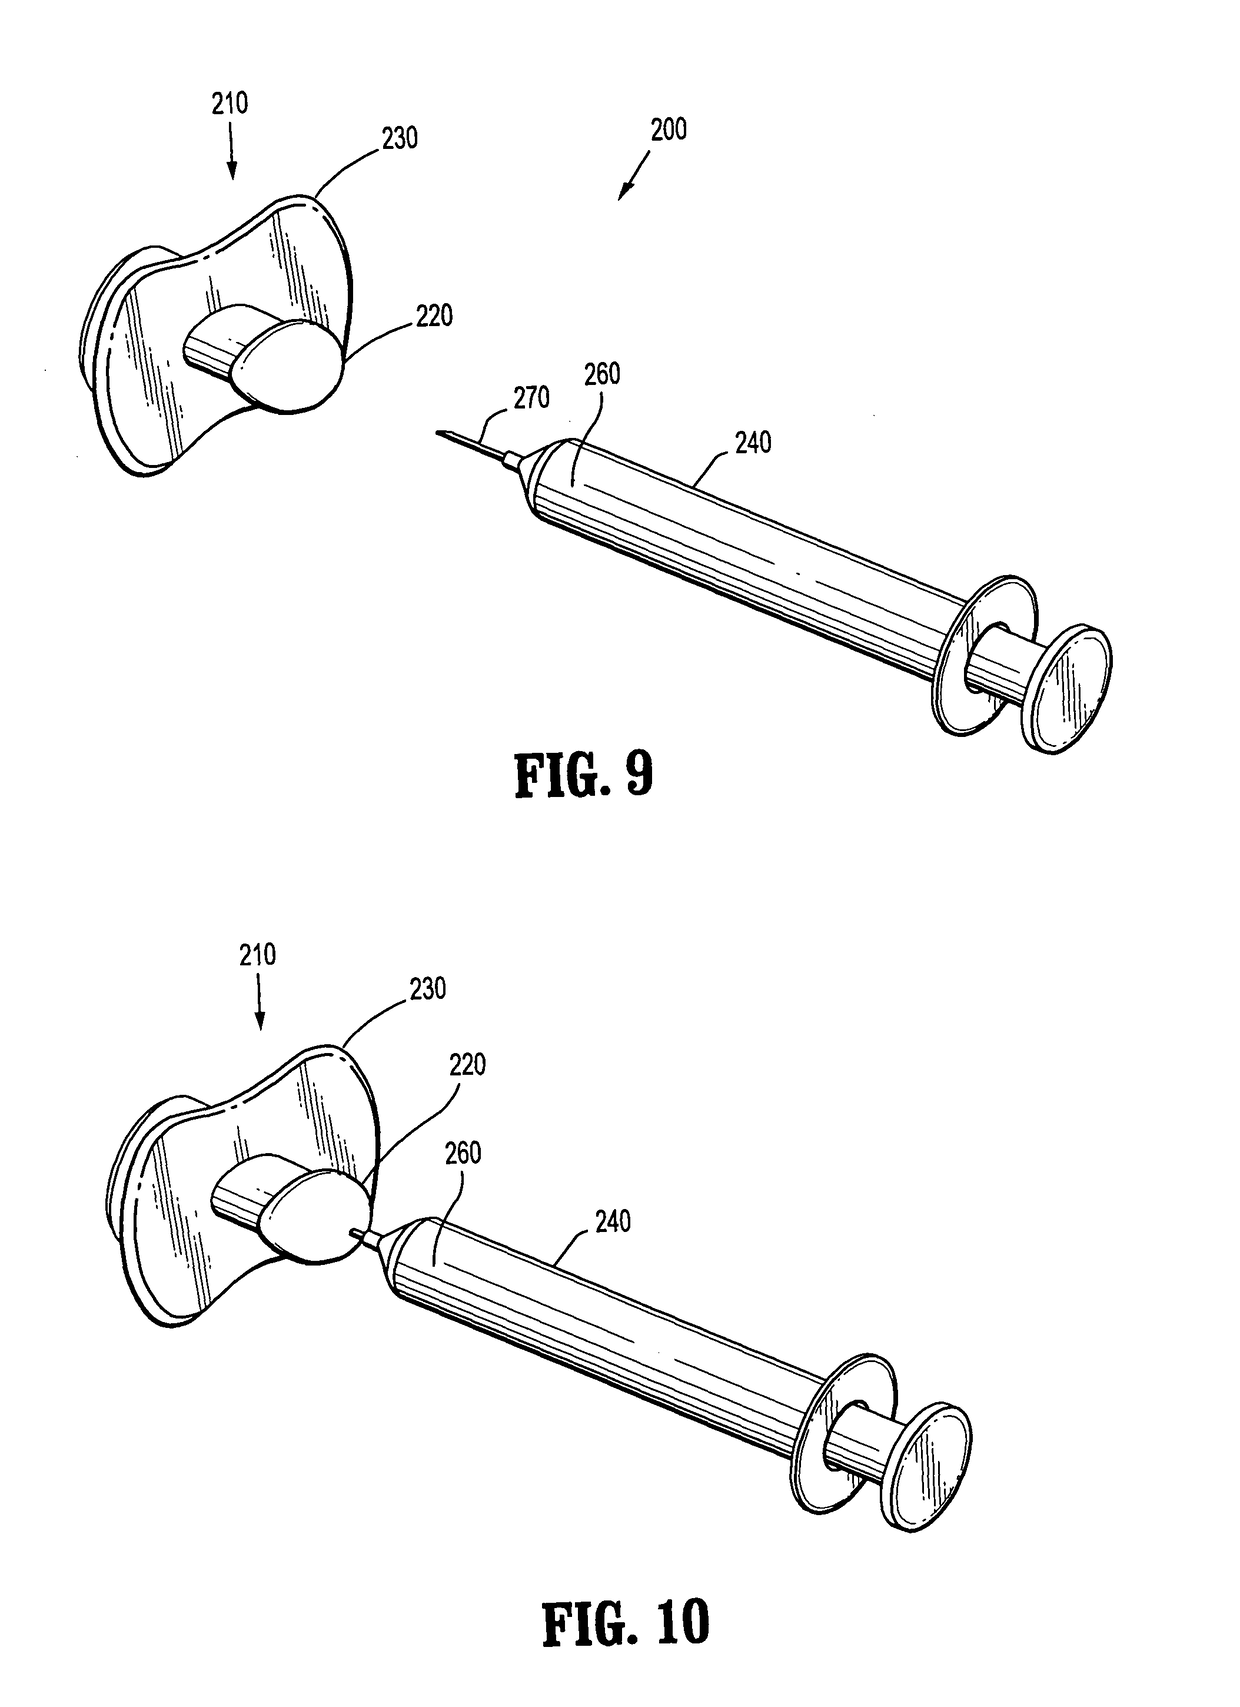 Oral administration device